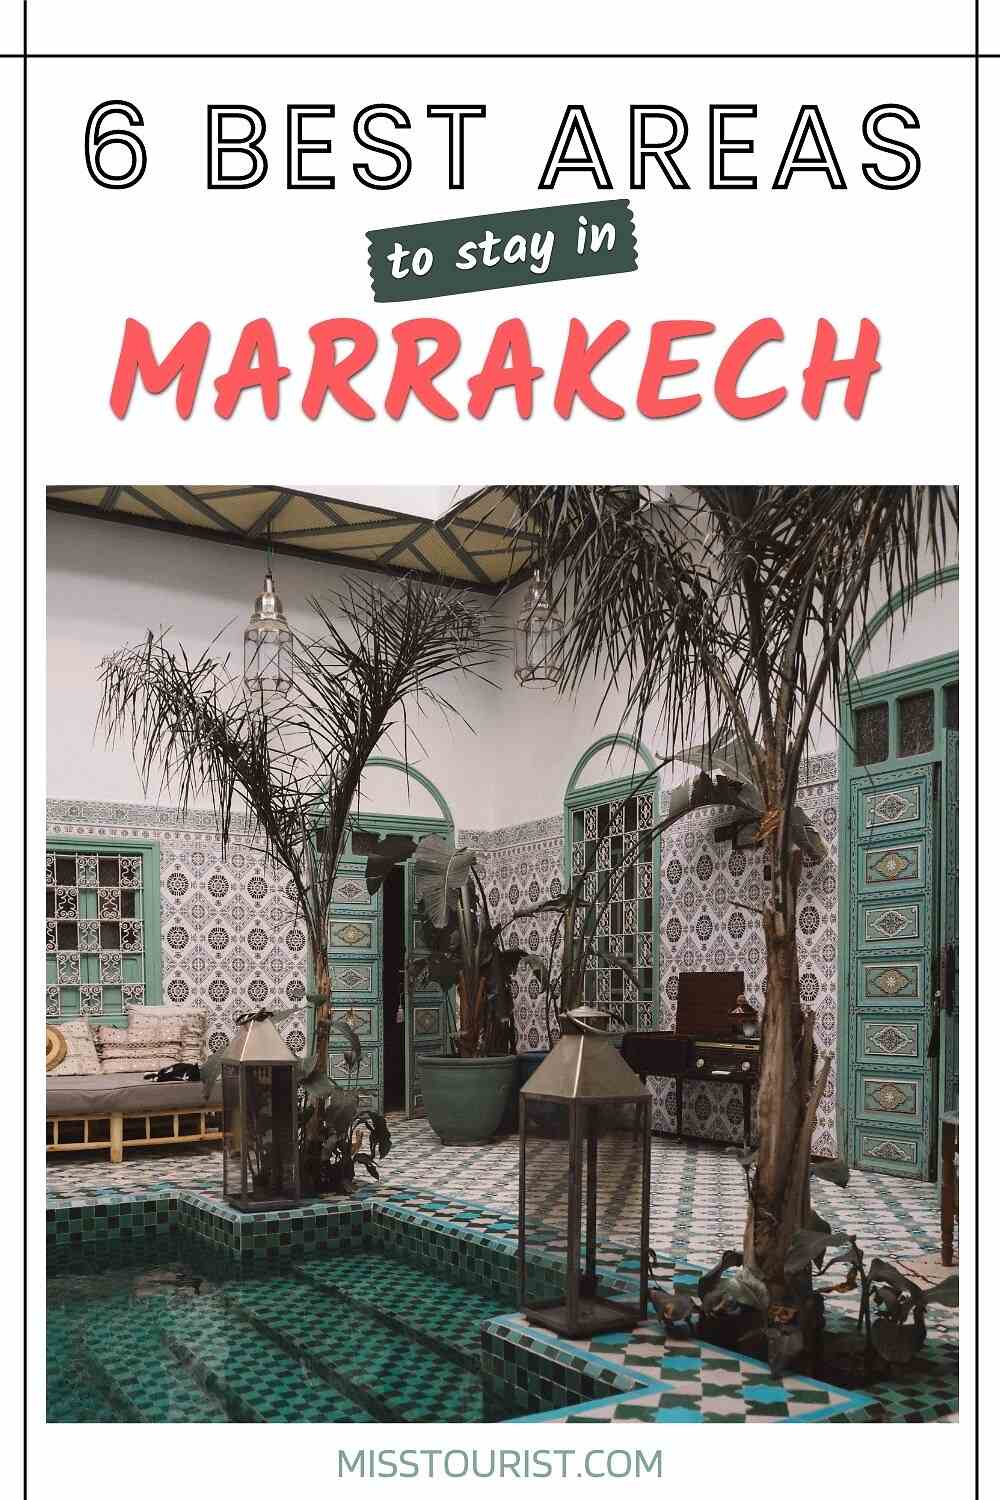 best areas to stay in marrakech pin 1